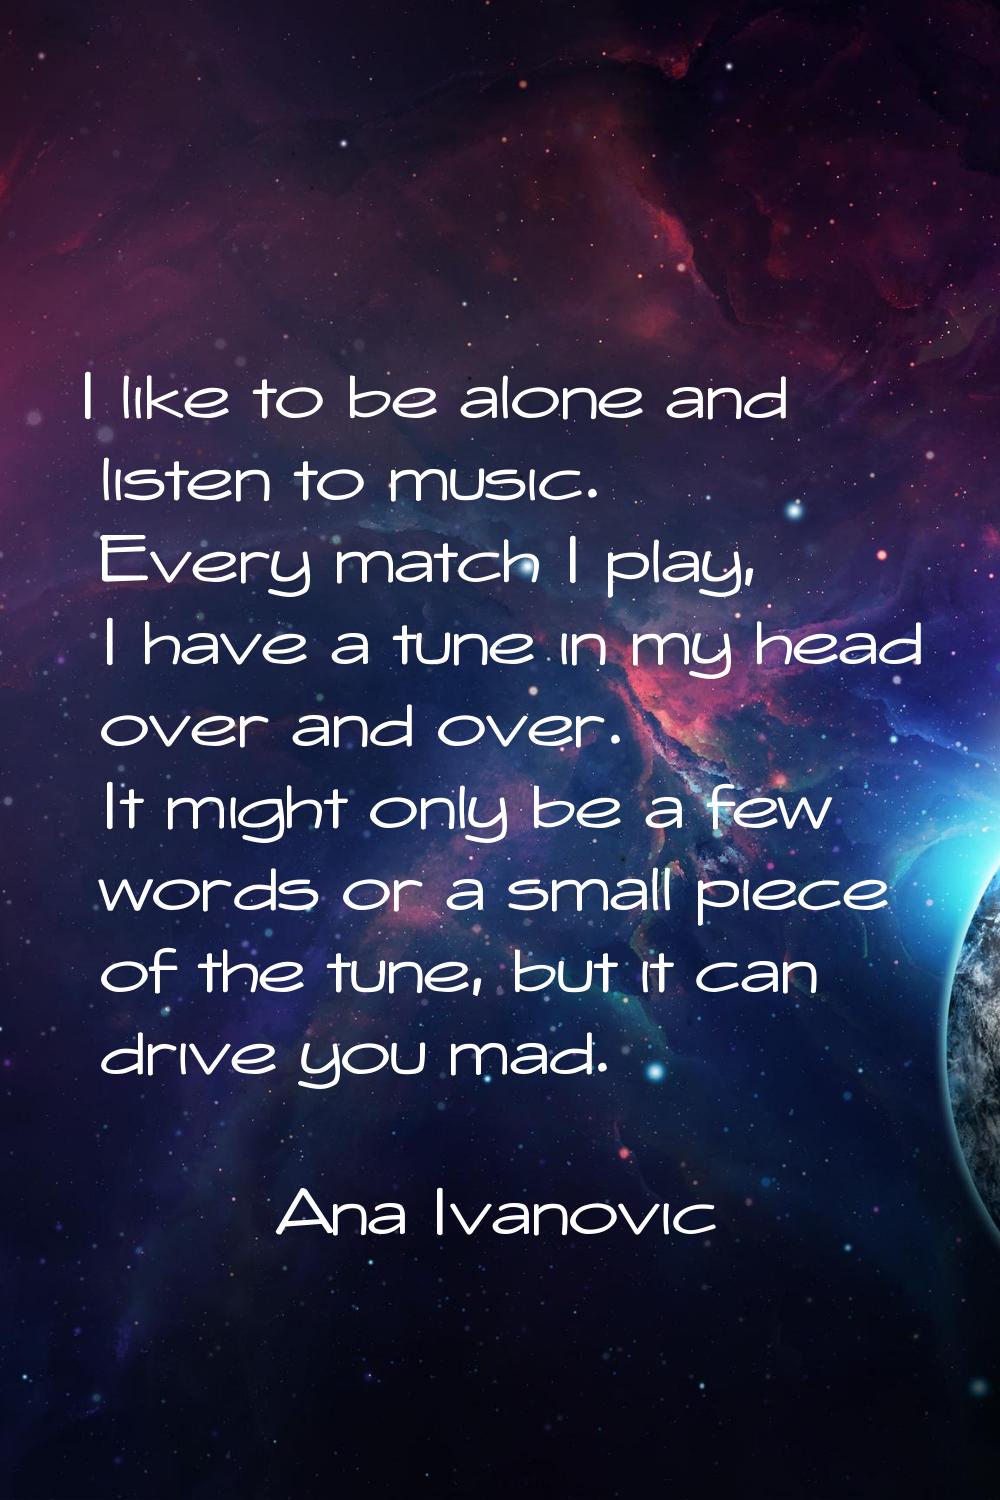 I like to be alone and listen to music. Every match I play, I have a tune in my head over and over.